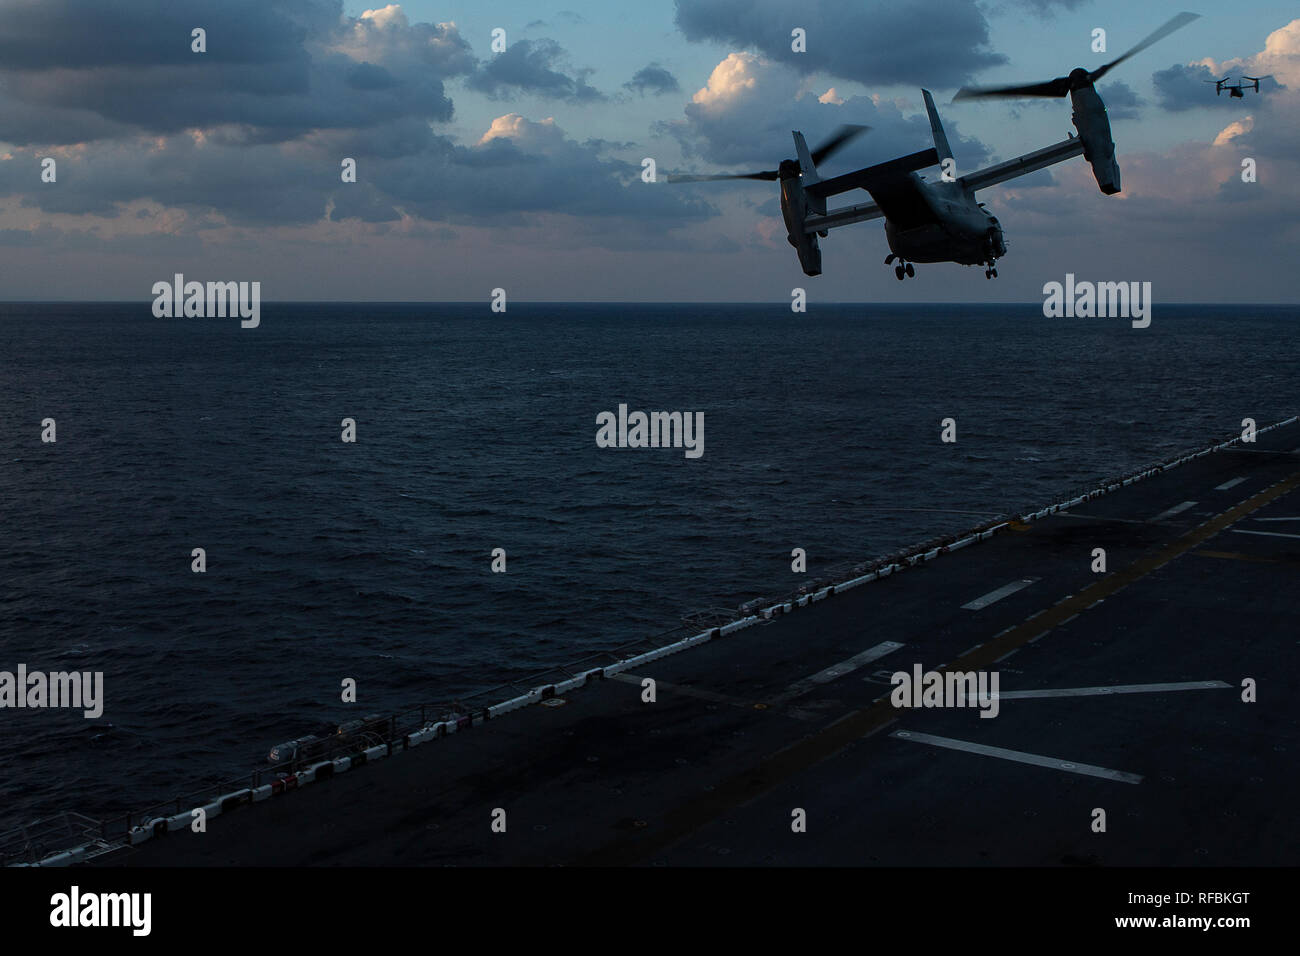 An MV-22B Osprey tiltrotor aircraft belonging to Marine Medium Tiltrotor Squadron 262 (Reinforced) takes to the sky during flight operations aboard the amphibious assault ship USS Wasp (LHD 1), underway in the Philippine Sea, Jan. 23, 2019. Naval aviators with VMM-262 (Rein.), the tiltrotor component of the 31st Marine Expeditionary Unit's Aviation Combat Element, perform a wide variety of aviation missions for the 31st MEU, including troop transport, heavy and medium lift, fixed-wing attack support and aerial reconnaissance. The 31st MEU, the Marine Corps’ only continuously forward-deployed M Stock Photo